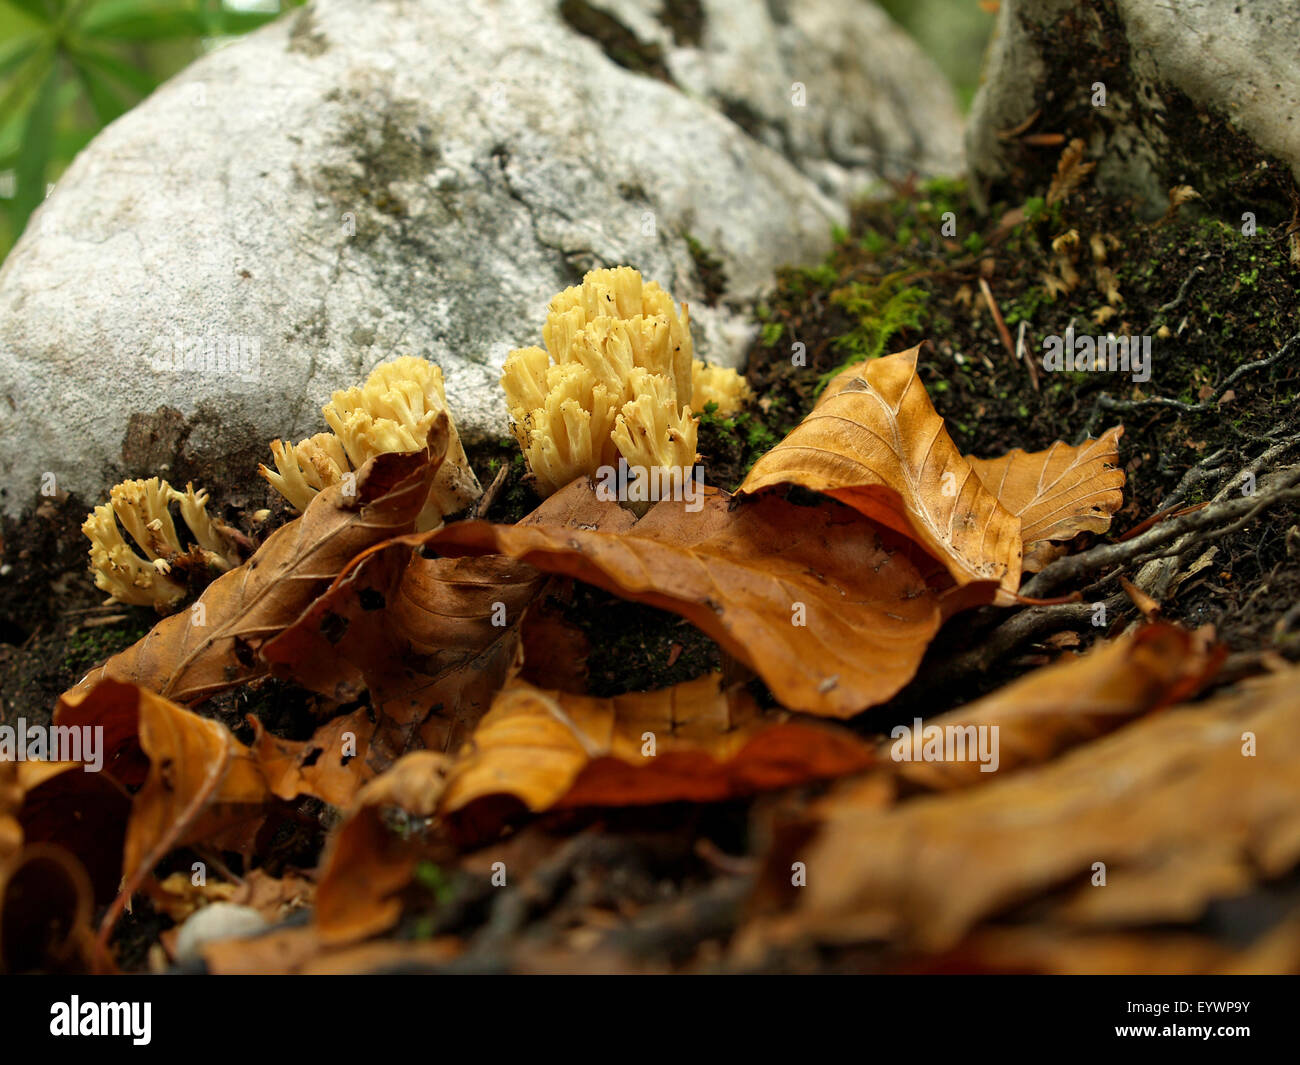 Coral fungi, Ramaria sp., on ground in a forest. Stock Photo